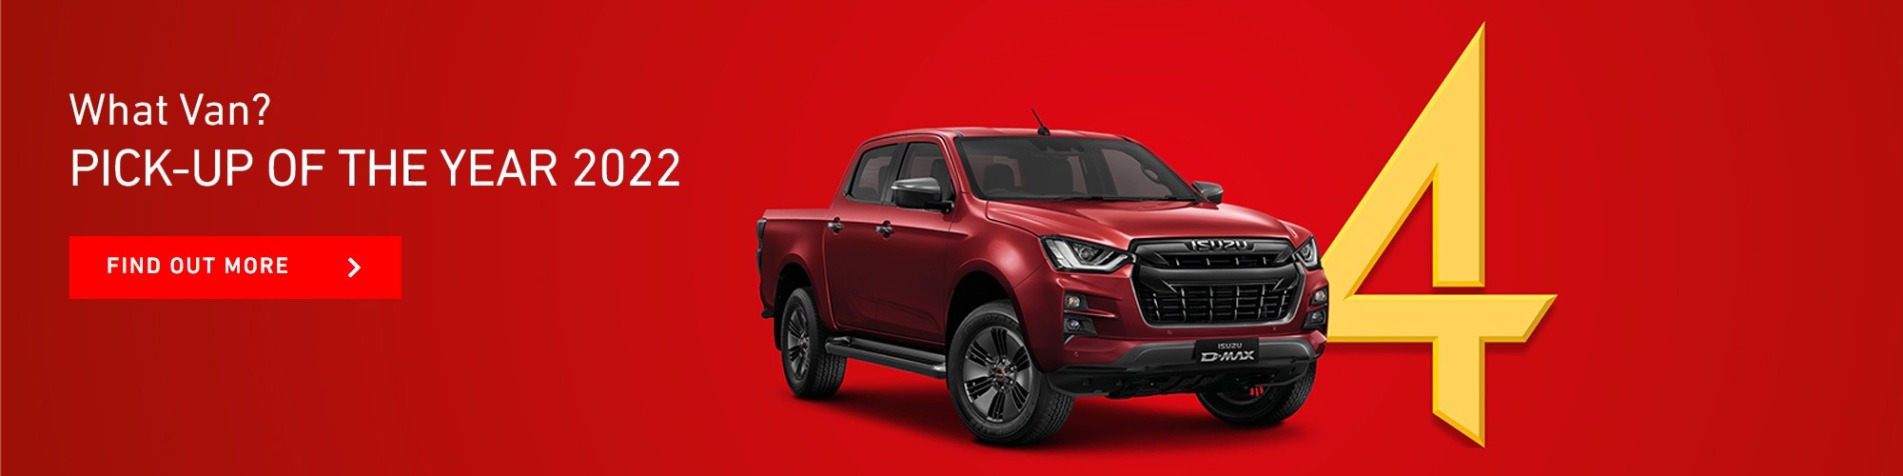 D-MAX Homepage Banner